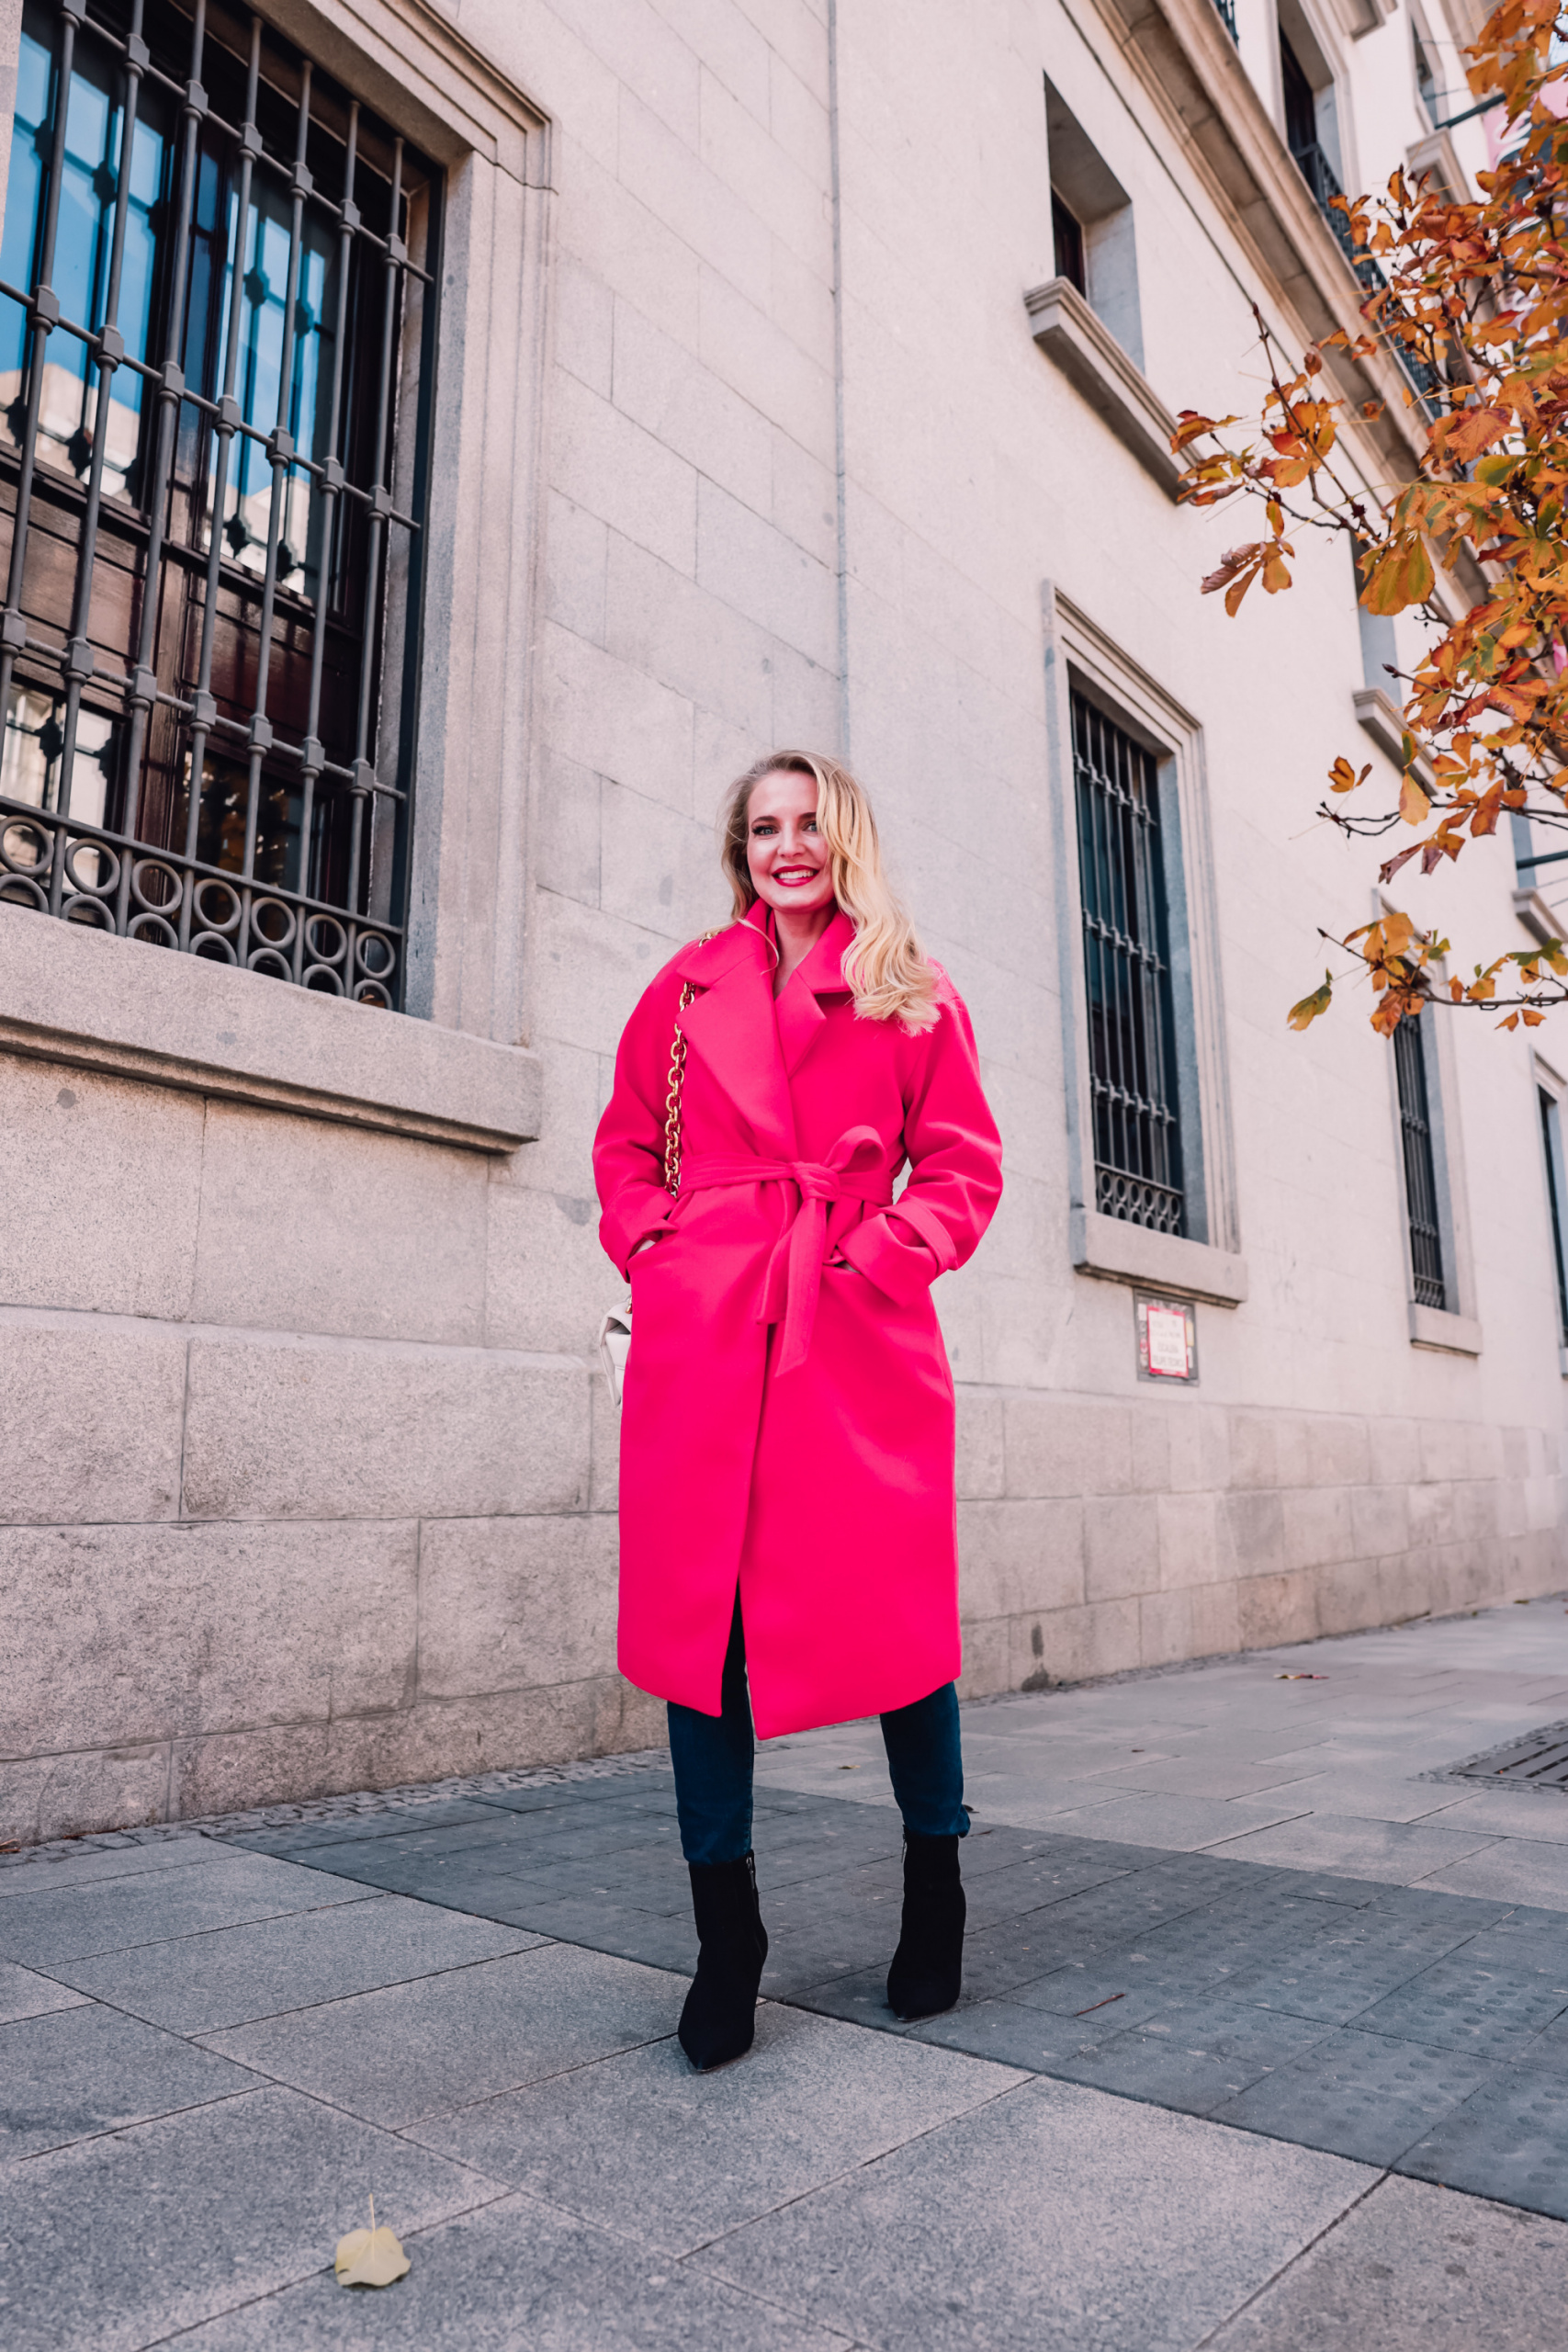 statement coat, how to wear statement coat, how to style statement coat, statement pieces, how to wear statement pieces, how to style statement pieces, erin busbee, madrid, spain, express hot pink wrap coat, express high waist skinny jeans, express black booties, express white bodysuit